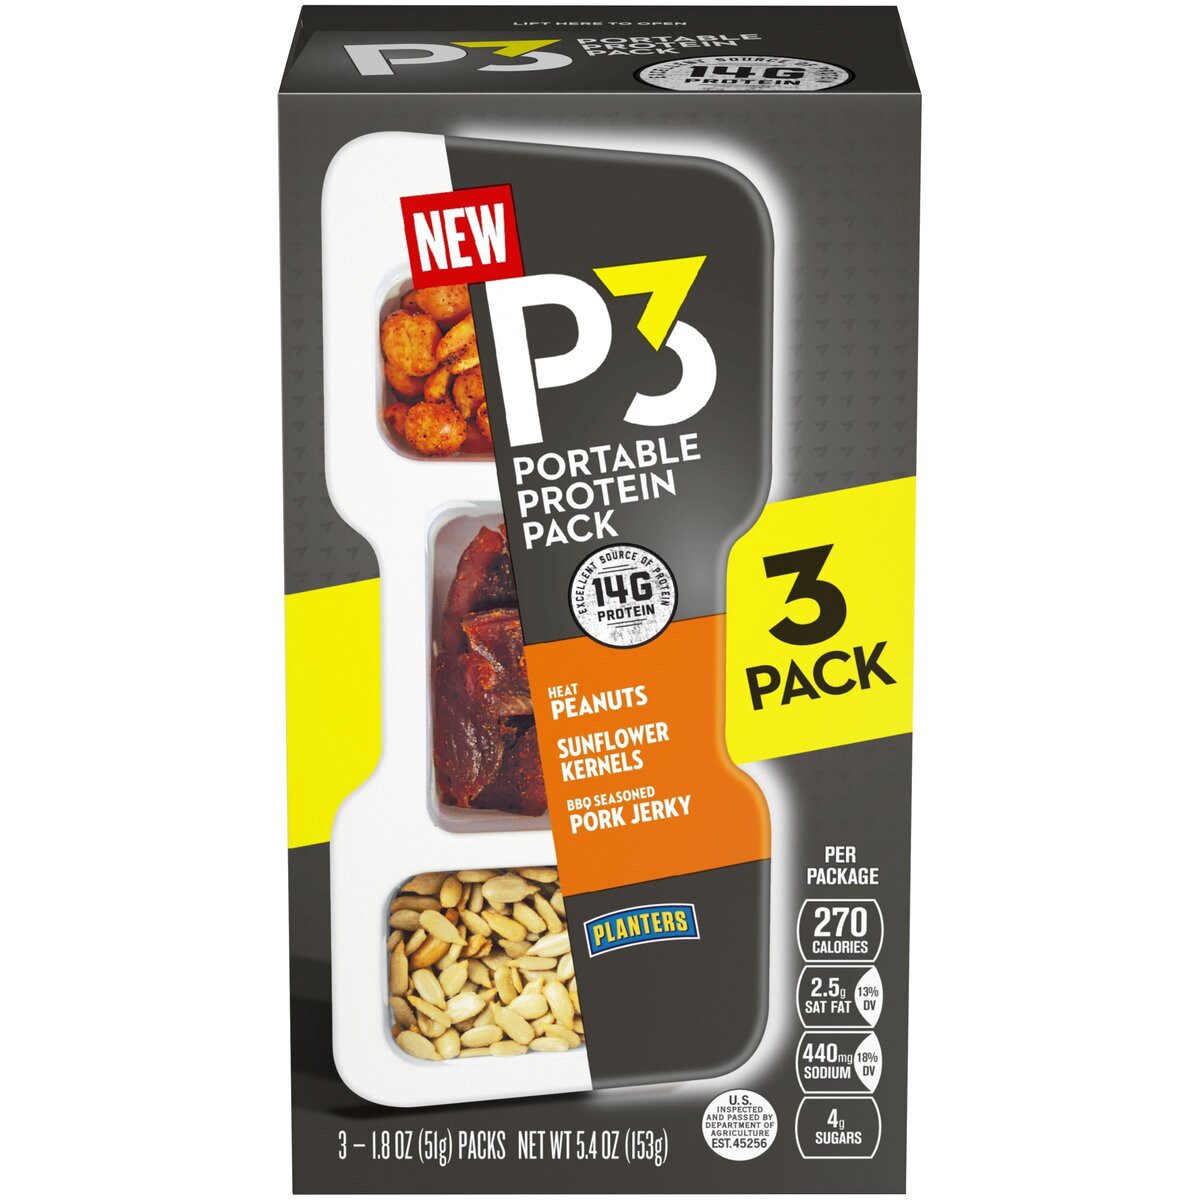 slide 1 of 8, P3 Portable Protein Snack Pack with Heat Peanuts, Sunflower Kernels & BBQ Seasoned Pork Jerky Trays, 5.4 oz